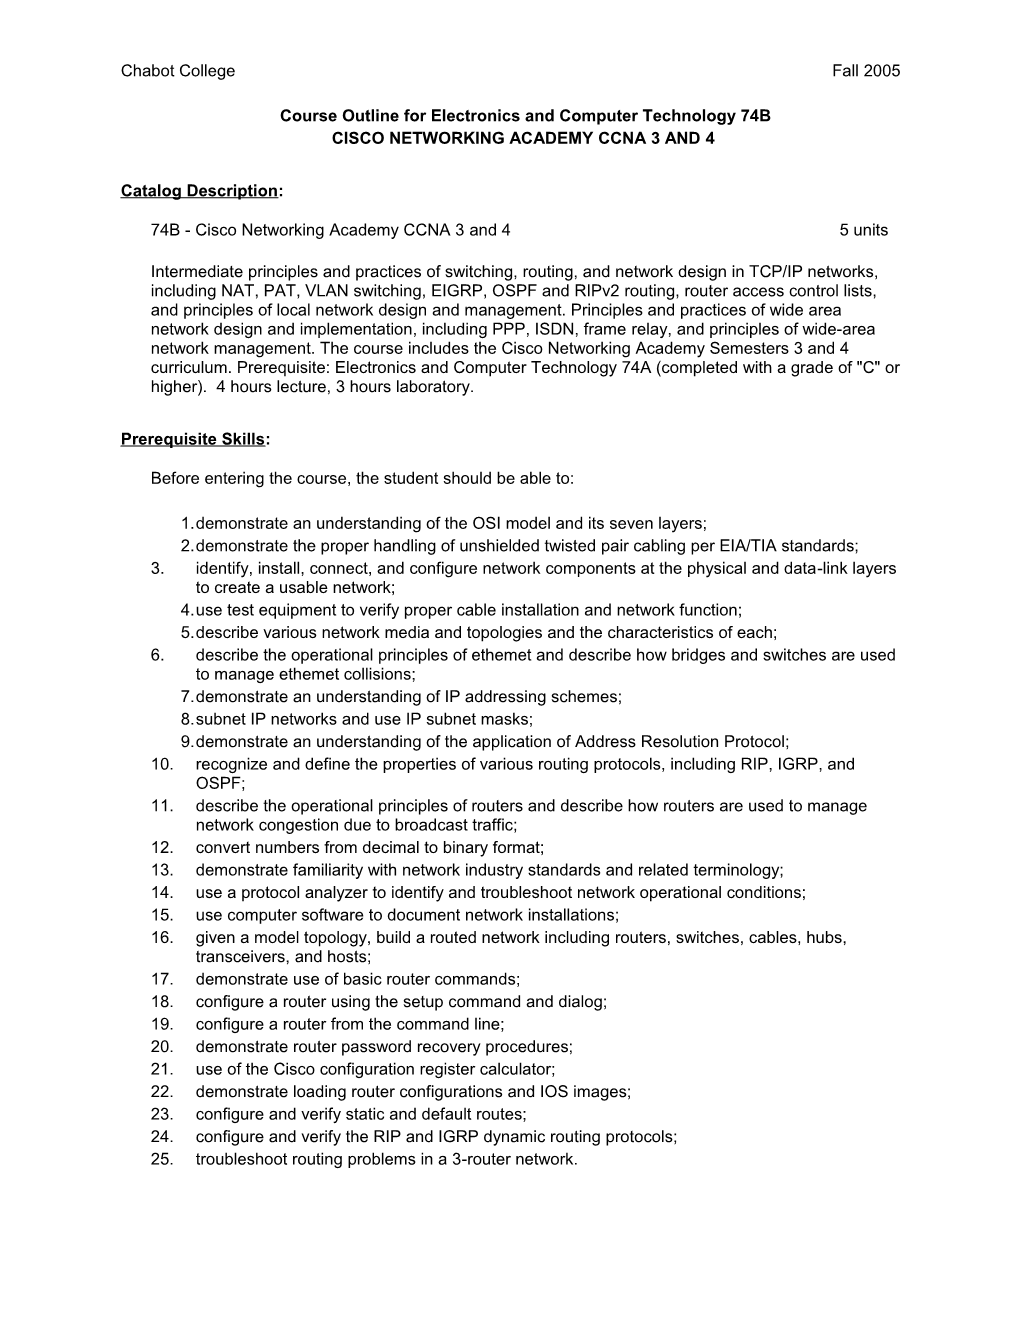 Course Outline for Electronics and Computer Technology 99